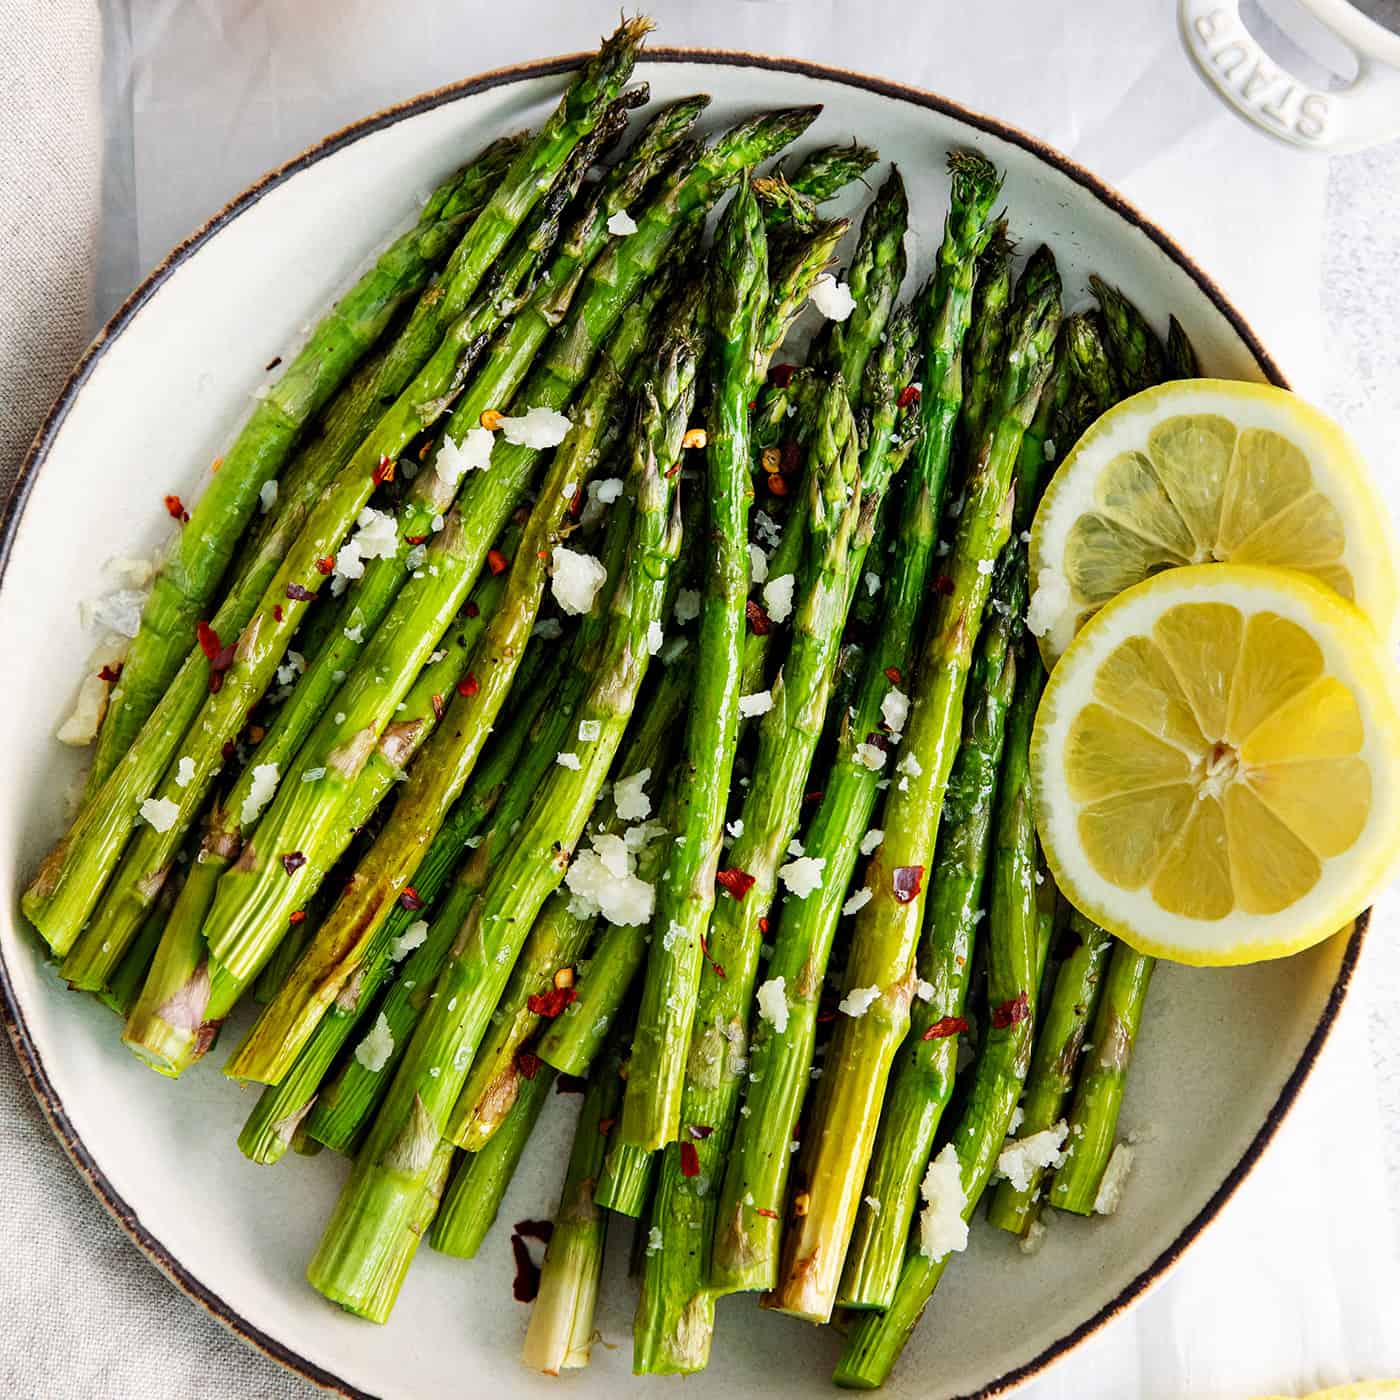 Overhead view of asparagus with lemon